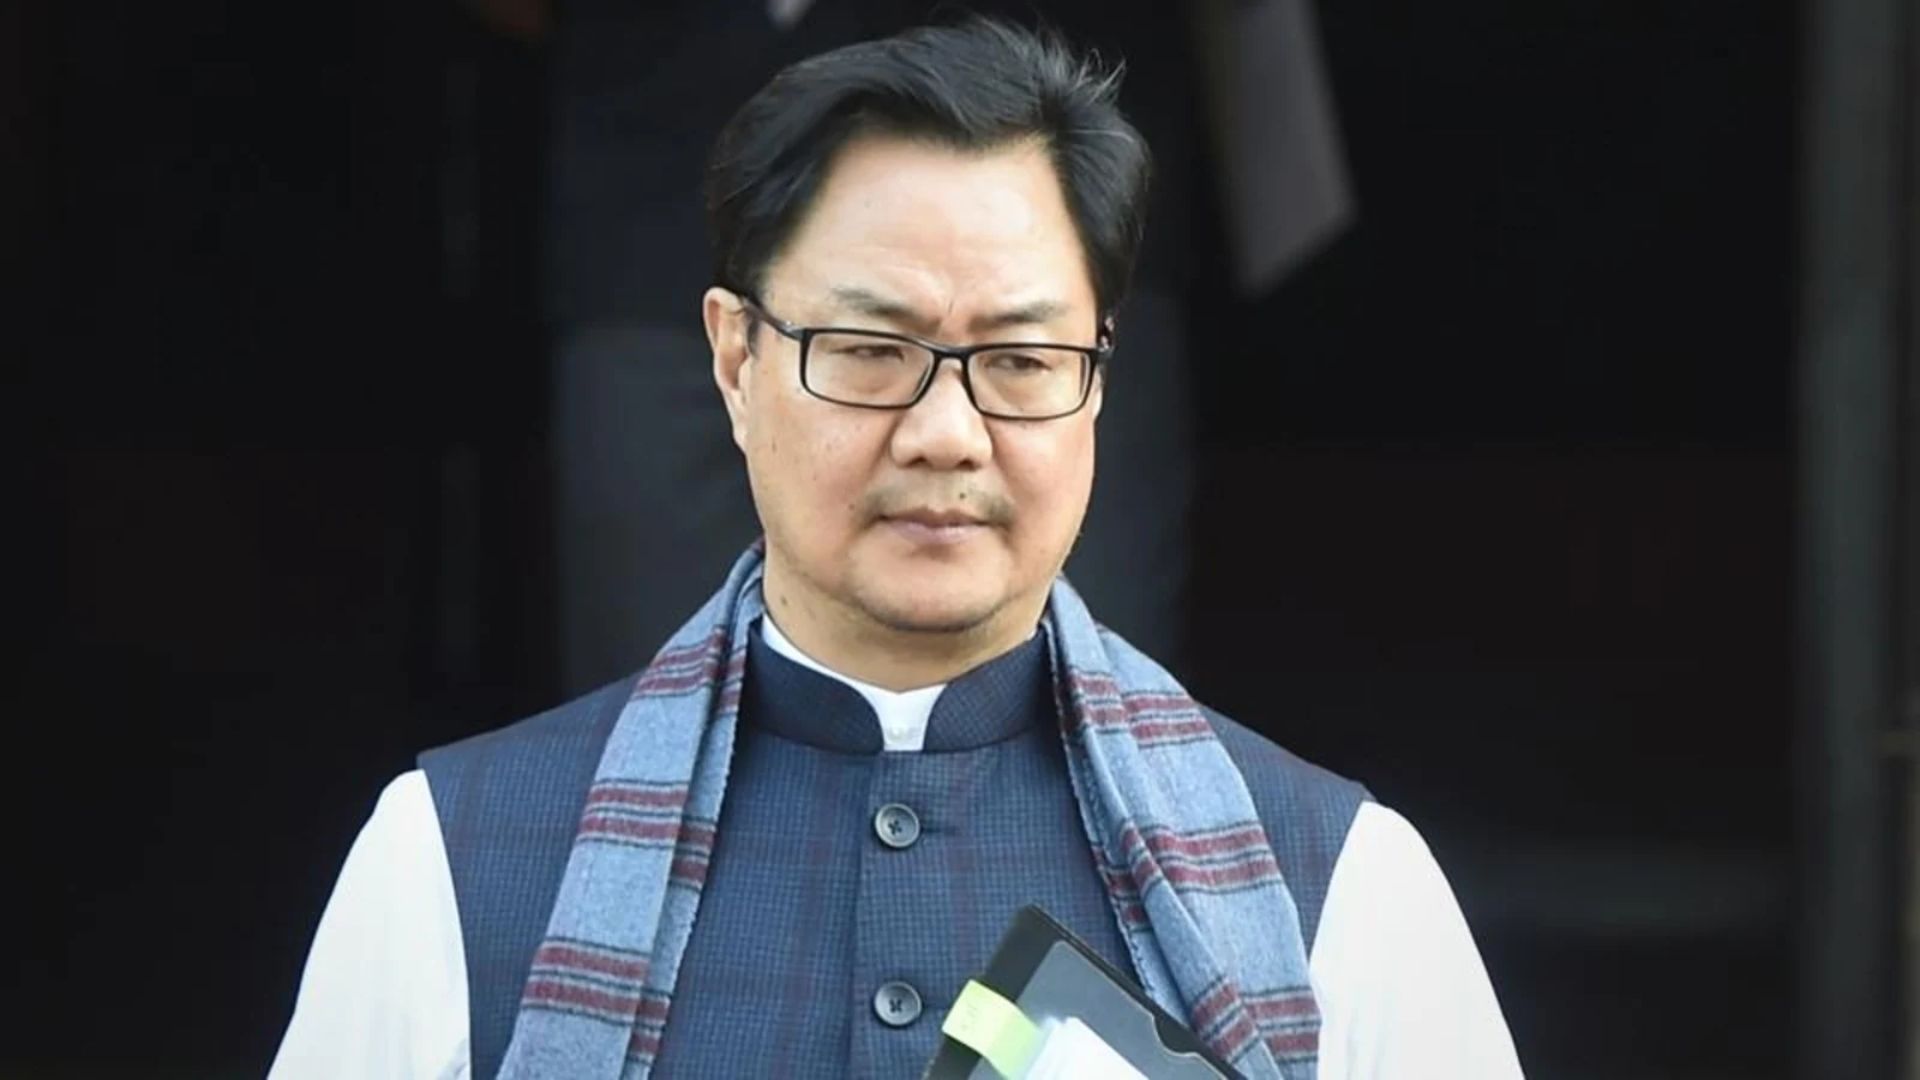 Union Minister Kiren Rijiju Affirms Practicality and Vision in Interim Budget Discussion with NewsX